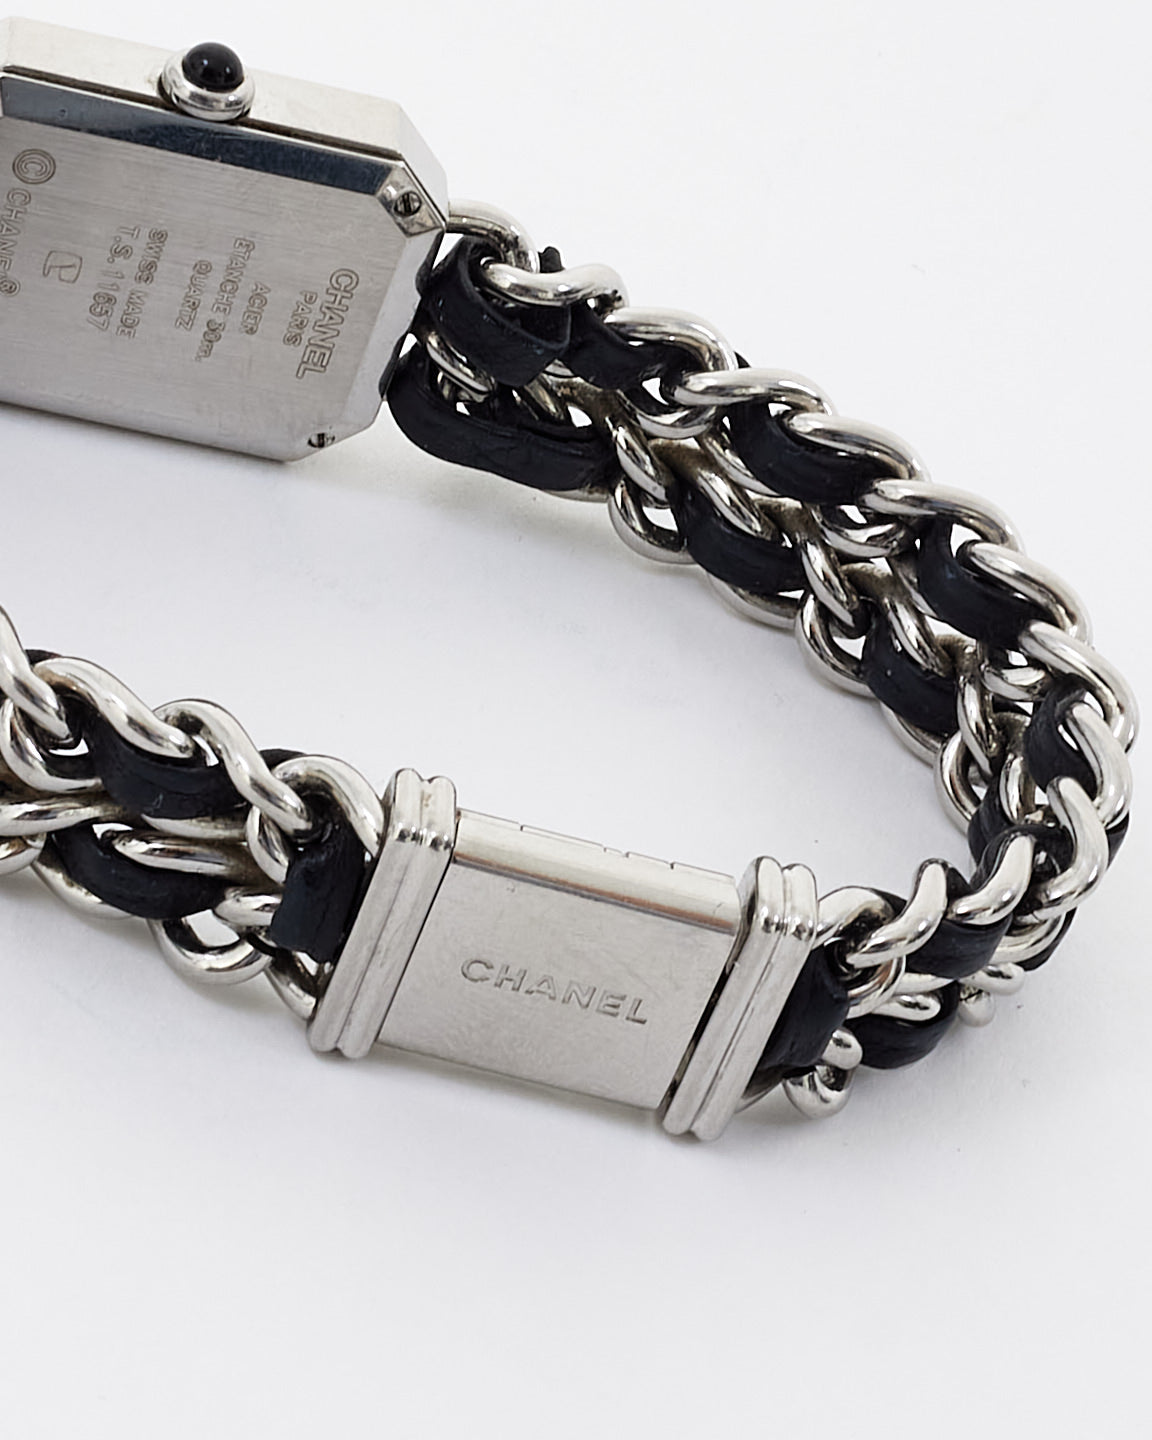 Chanel Sterling Silver & Black Leather Premiere Iconic Chain Watch